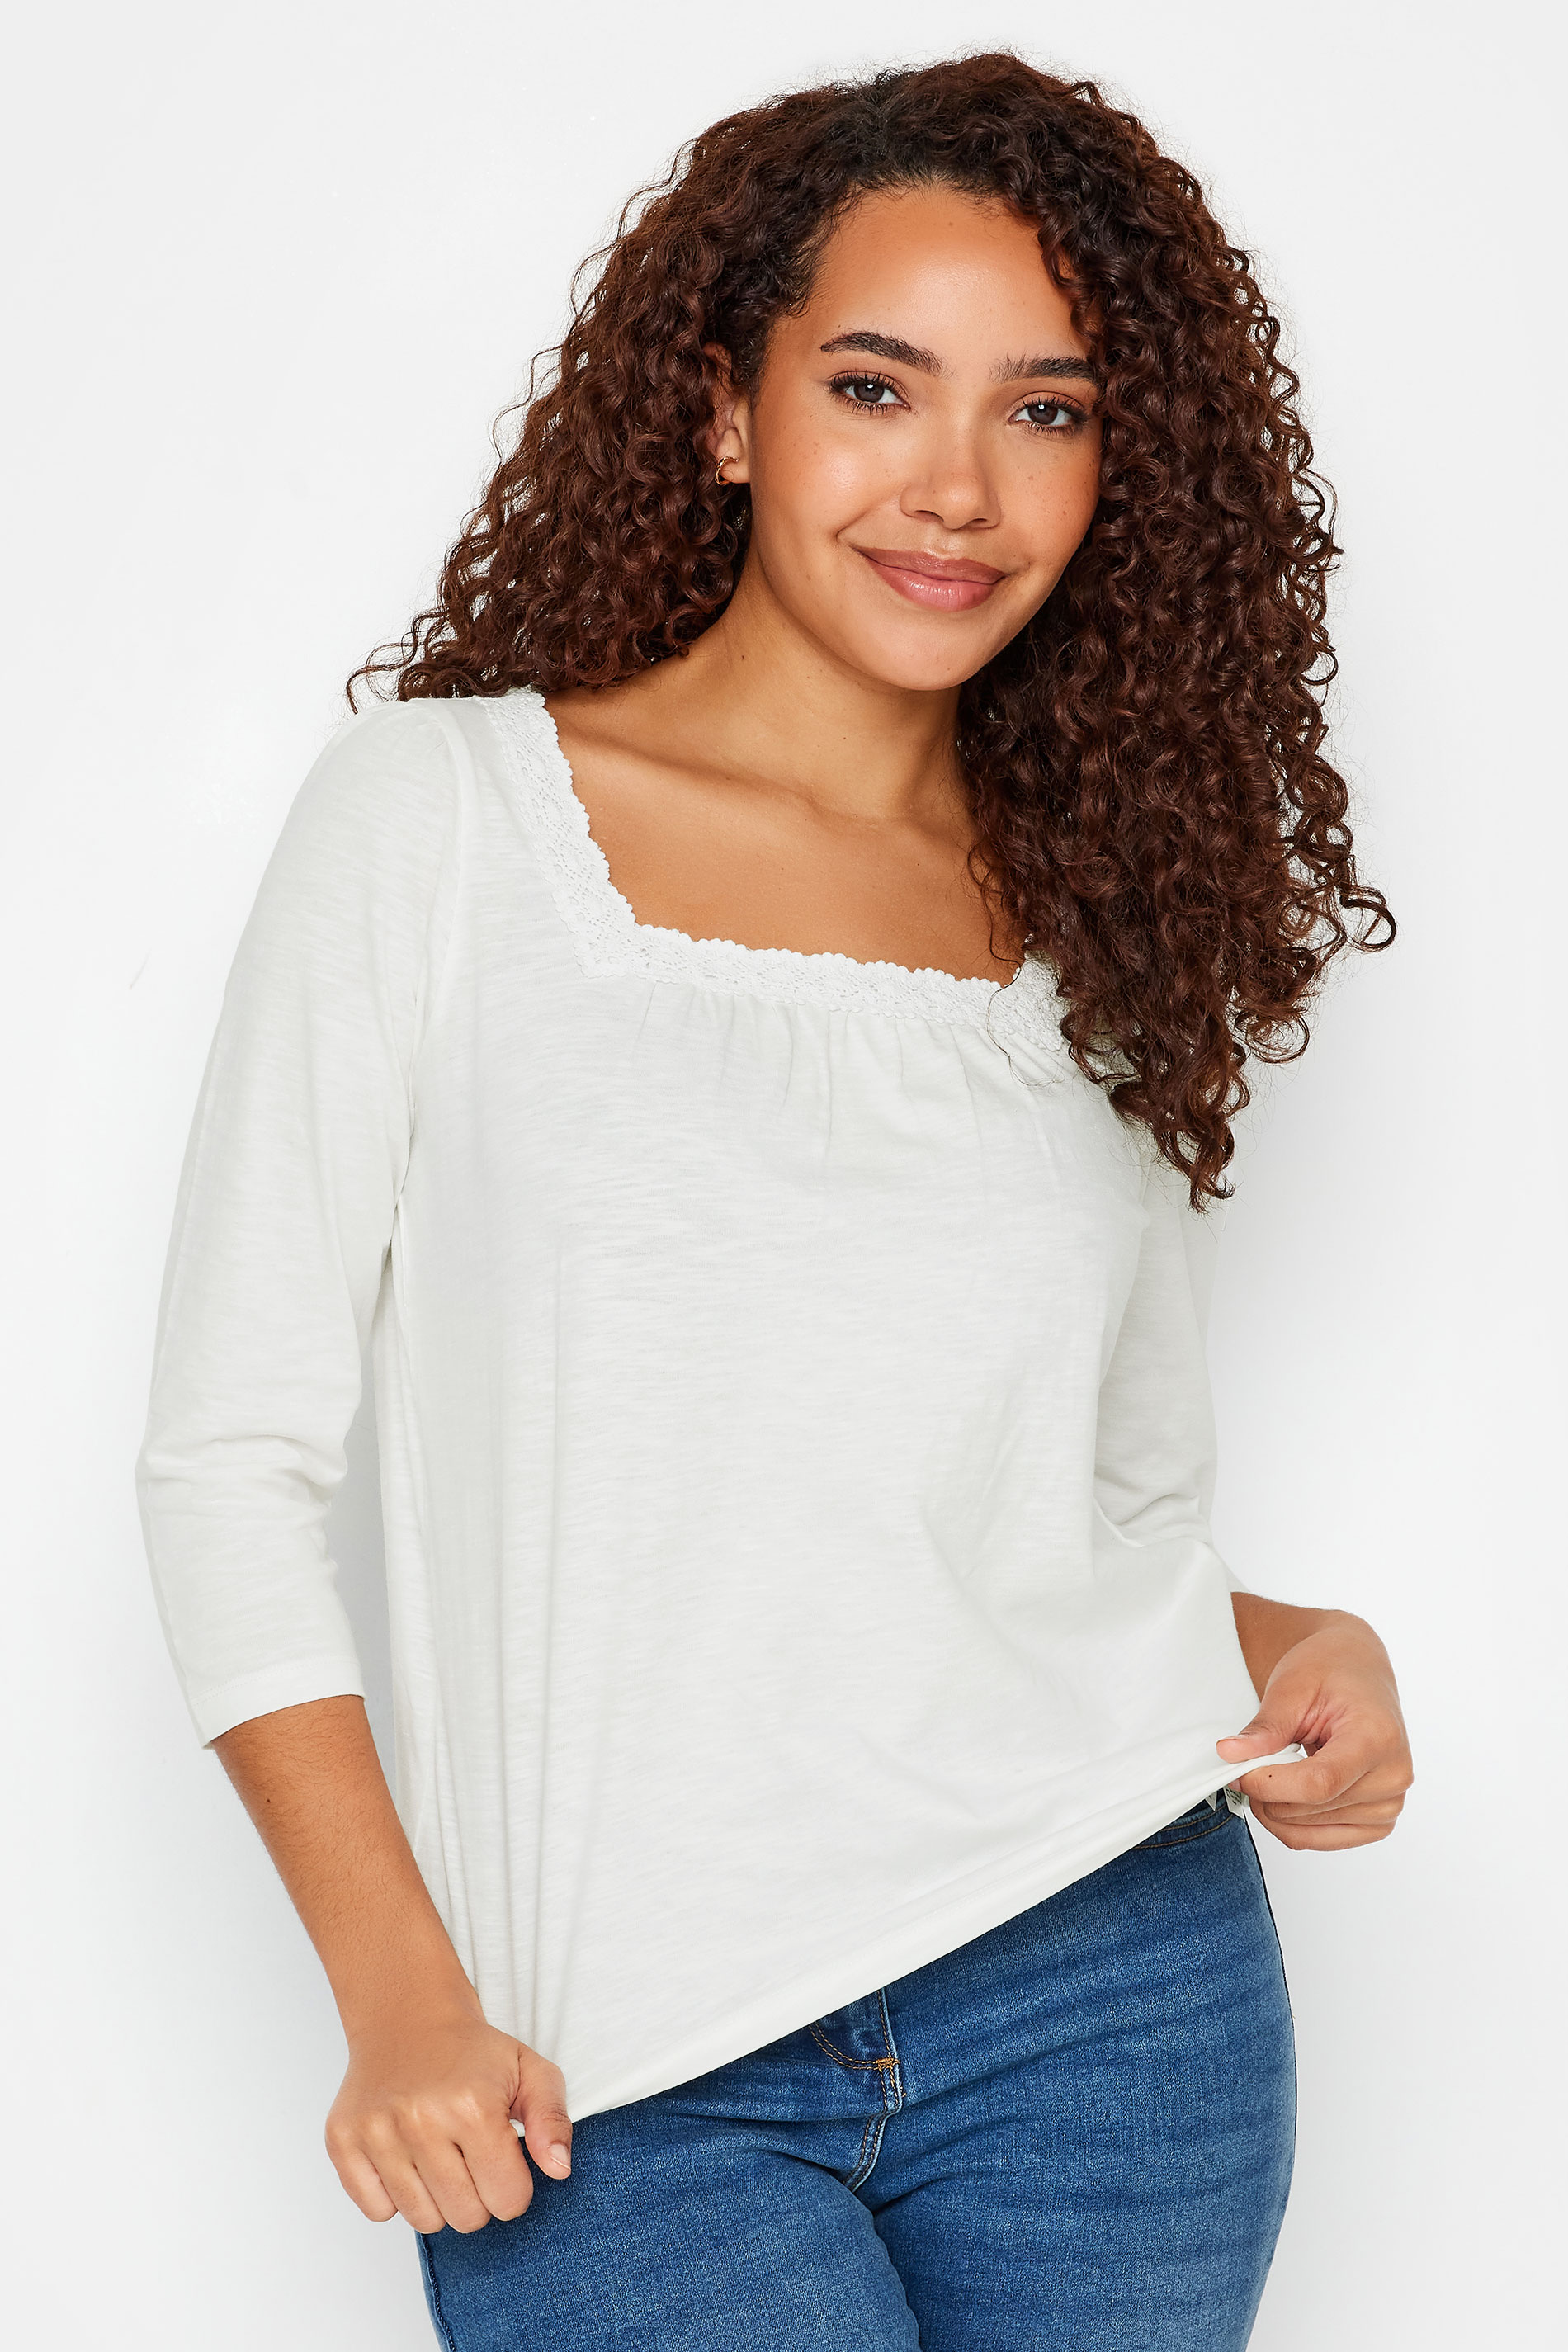 M&Co White Square Neck 3/4 Sleeve Top | M&Co 2